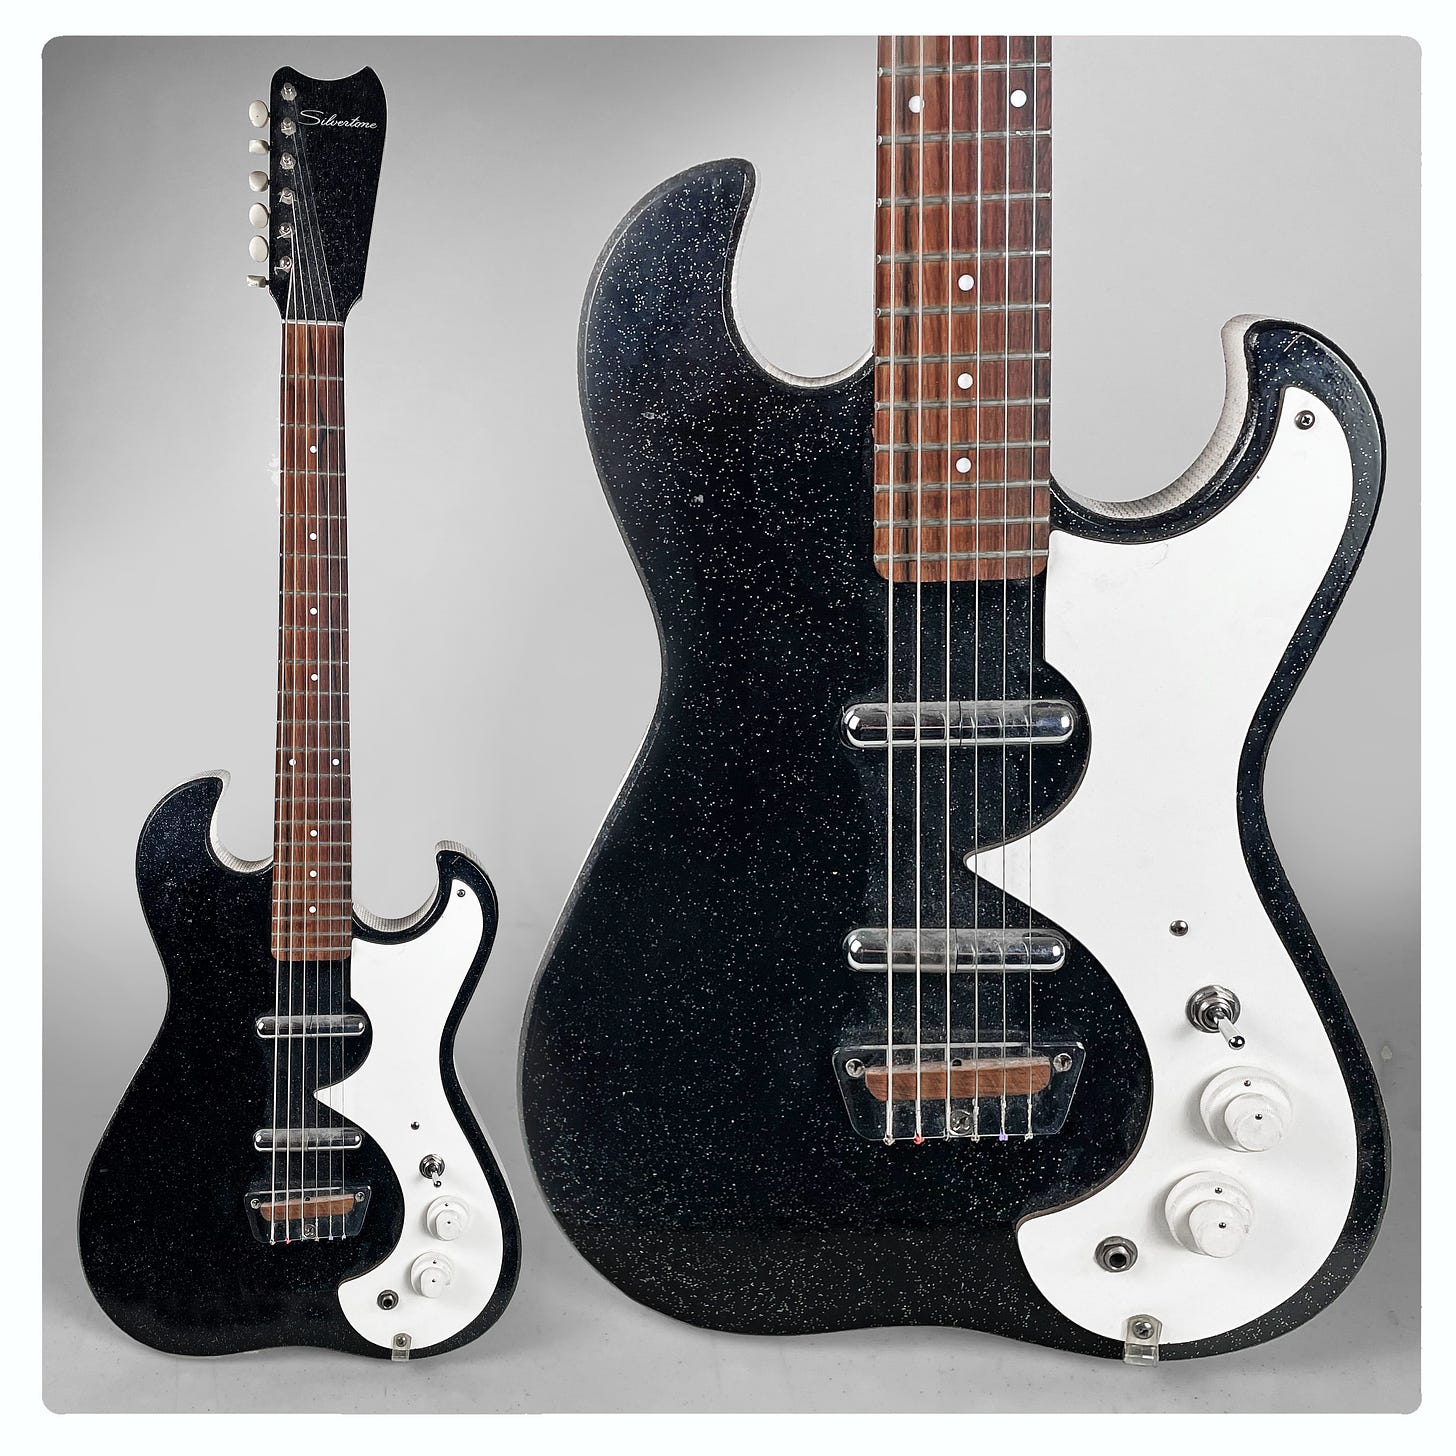 Jeff Tweedy’s 1960s Silvertone 1449 electric guitar, a black guitar with sparkly finish